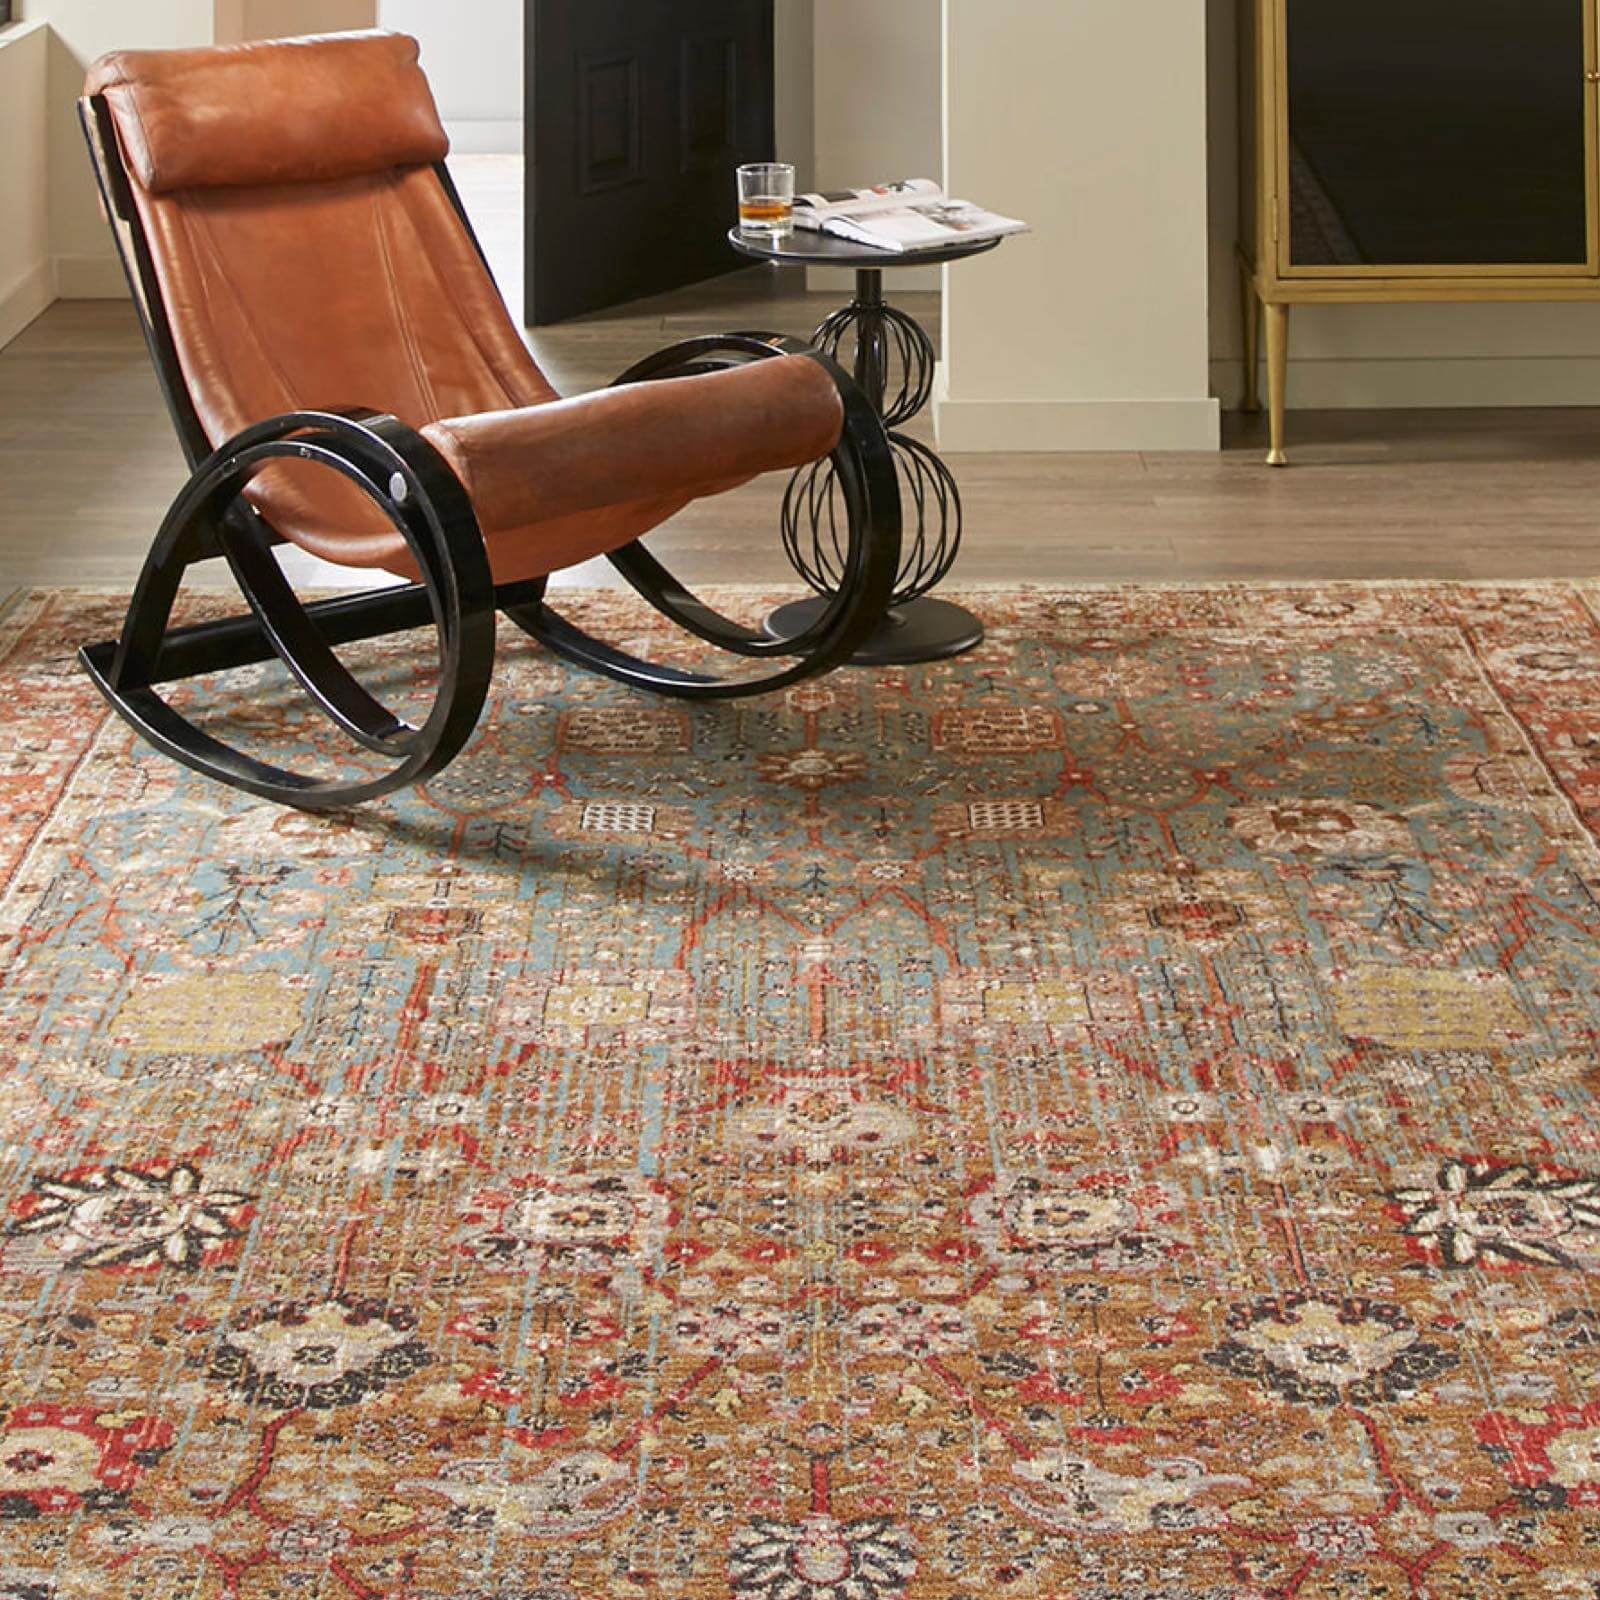 Rug With Chair | Location Carpet